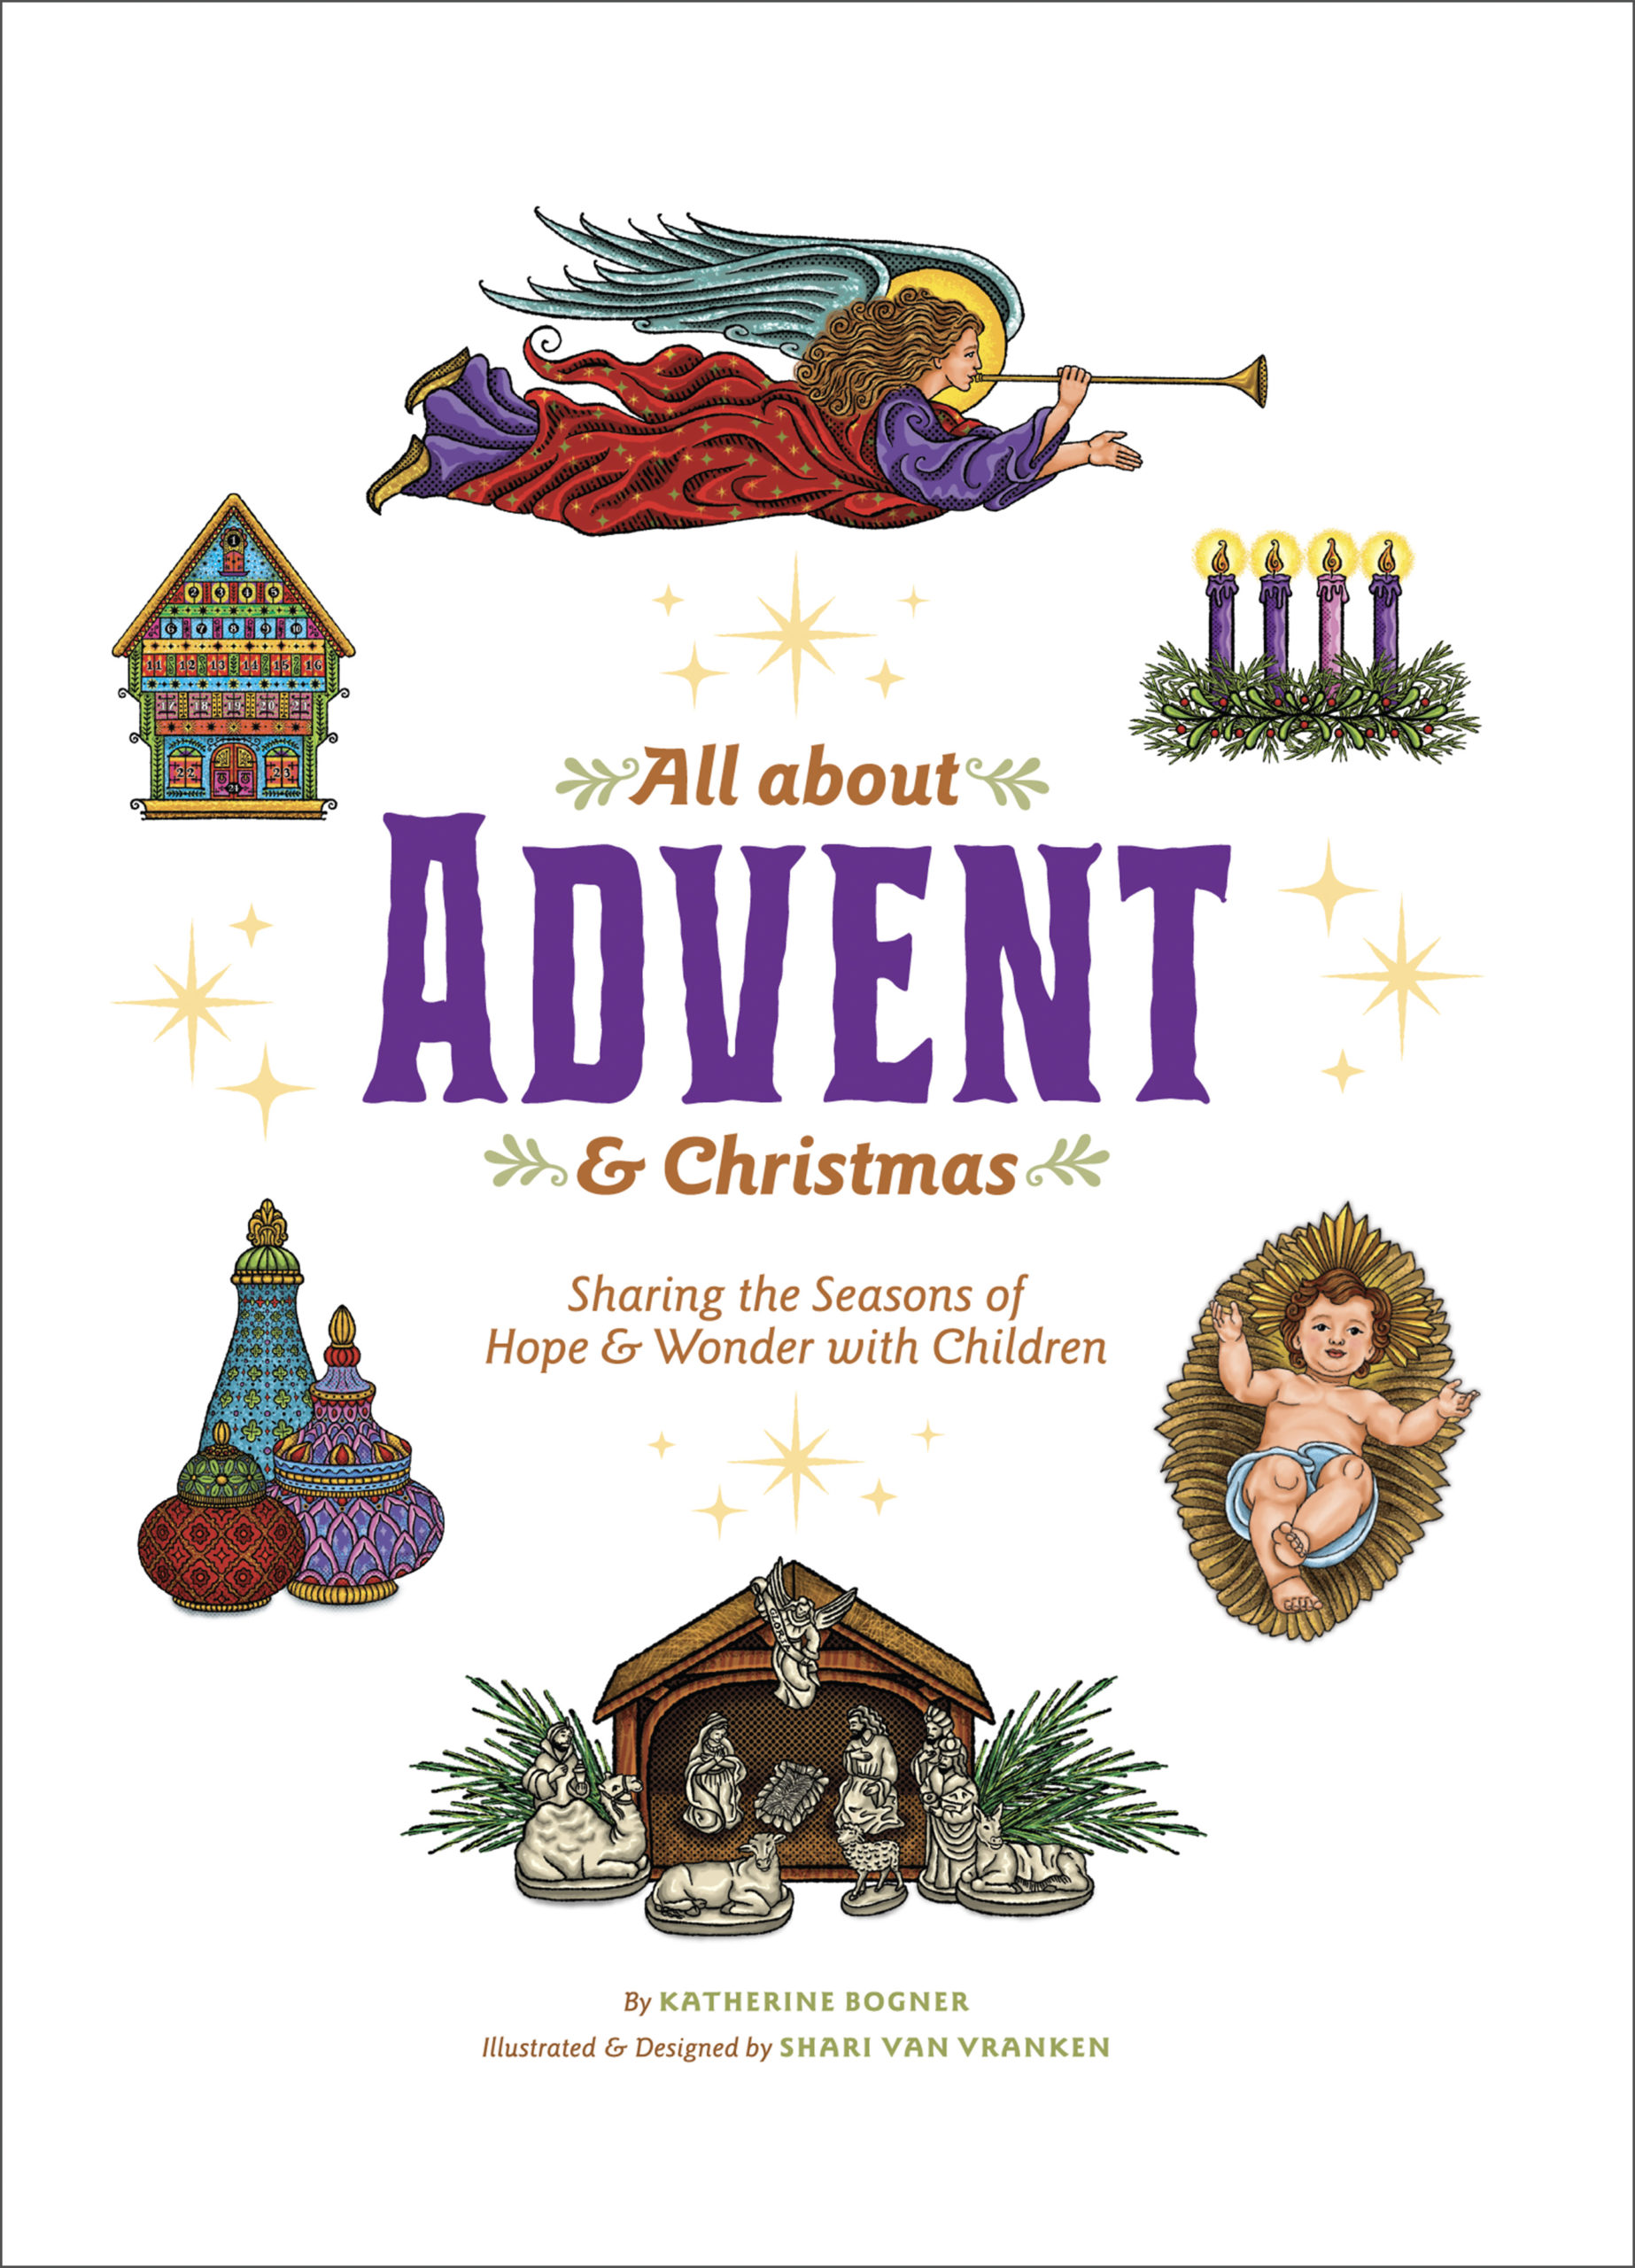 Hope　St.　All　Seasons　about　Wonder　Sharing　Advent　Christmas:　the　of　–　with　Children　Paul　Center